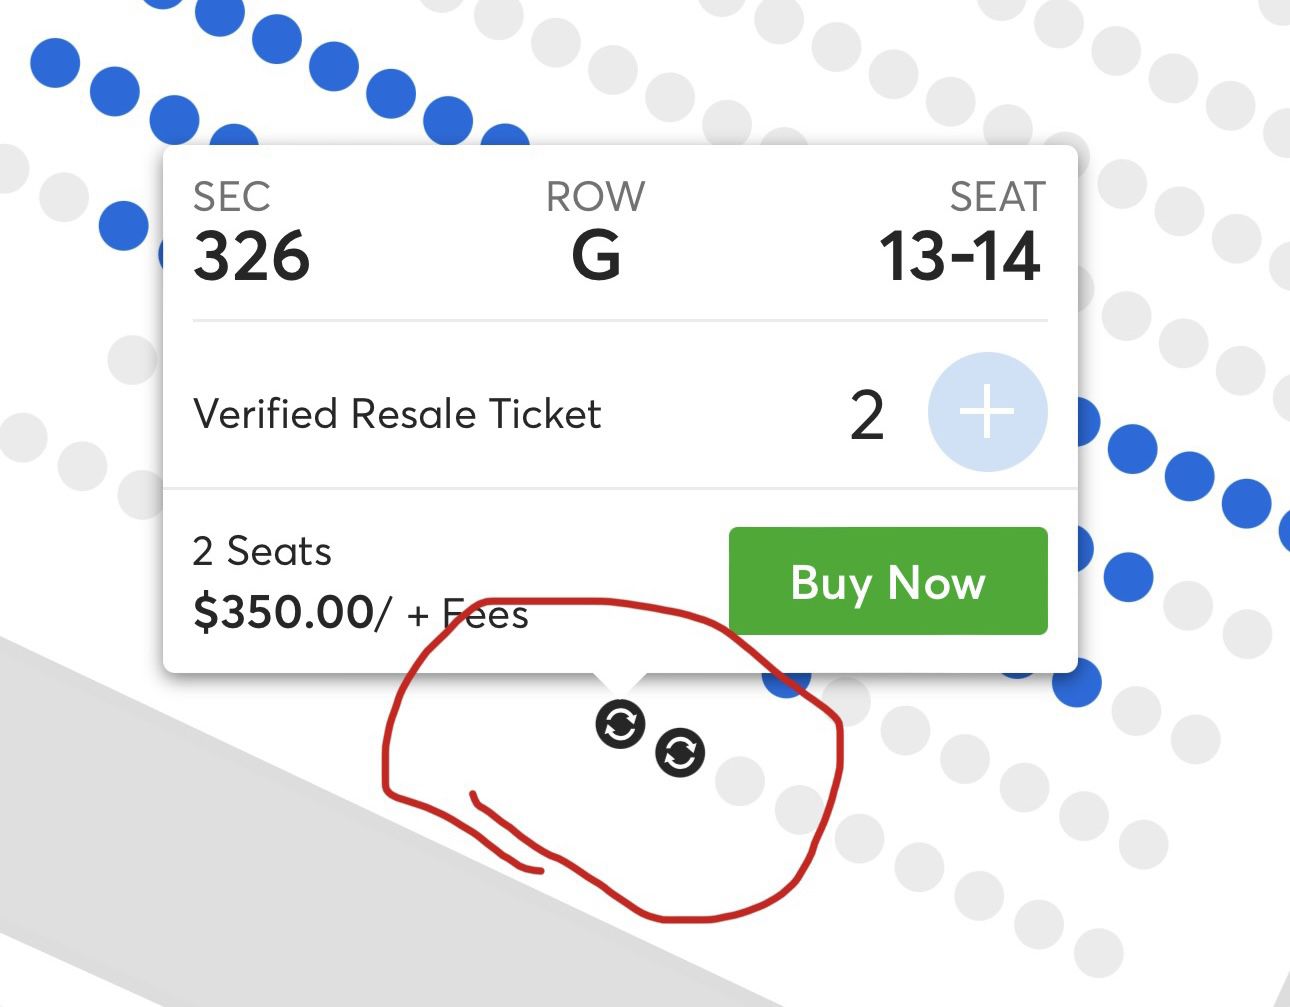 Selling Pair Of Metallica Tickets, Front Row Of Section.